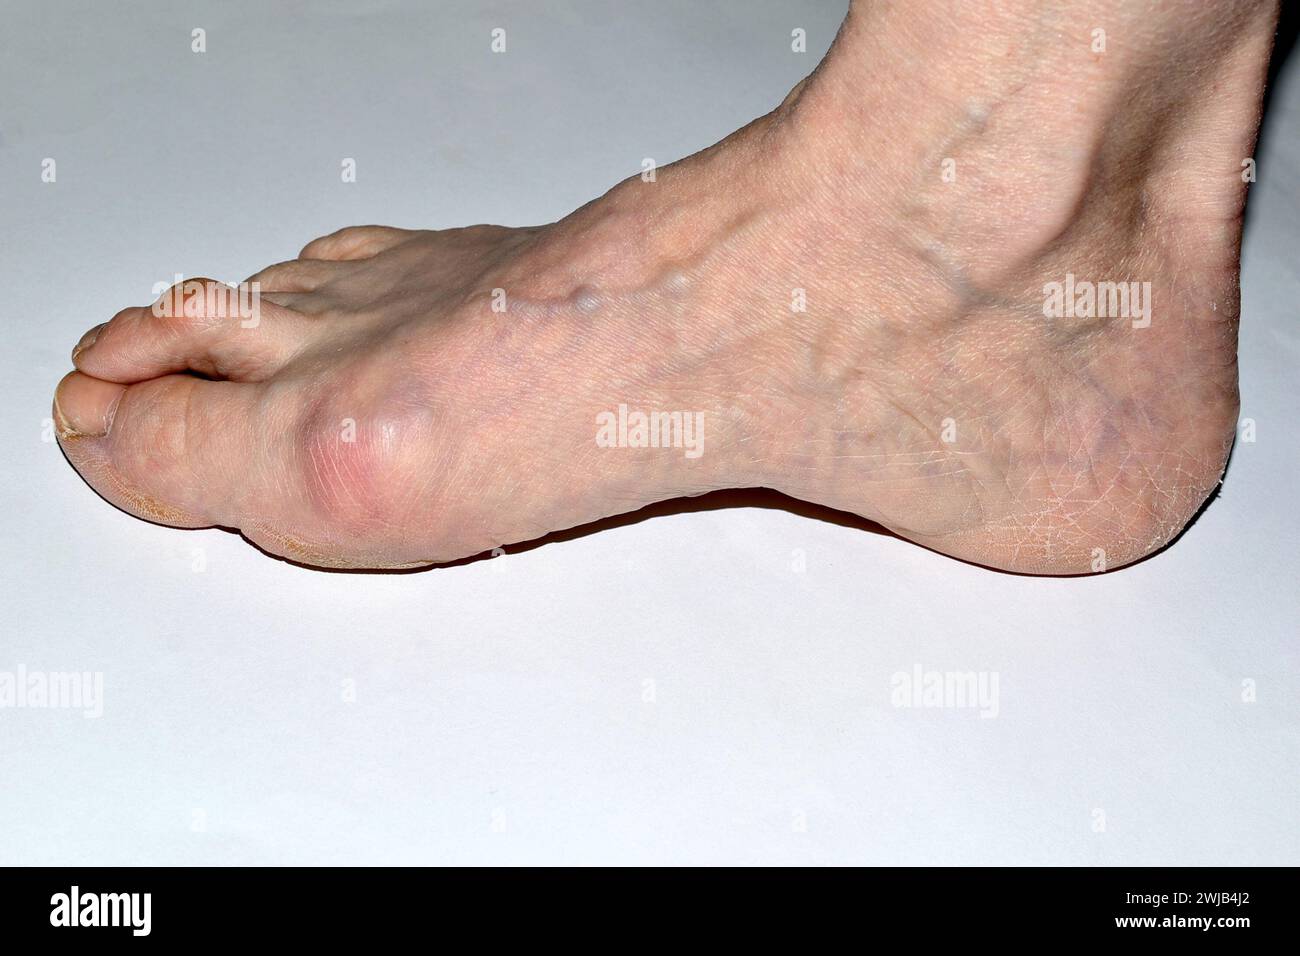 The picture shows the right foot of the leg affected by the disease of the hallux valgus. Stock Photo